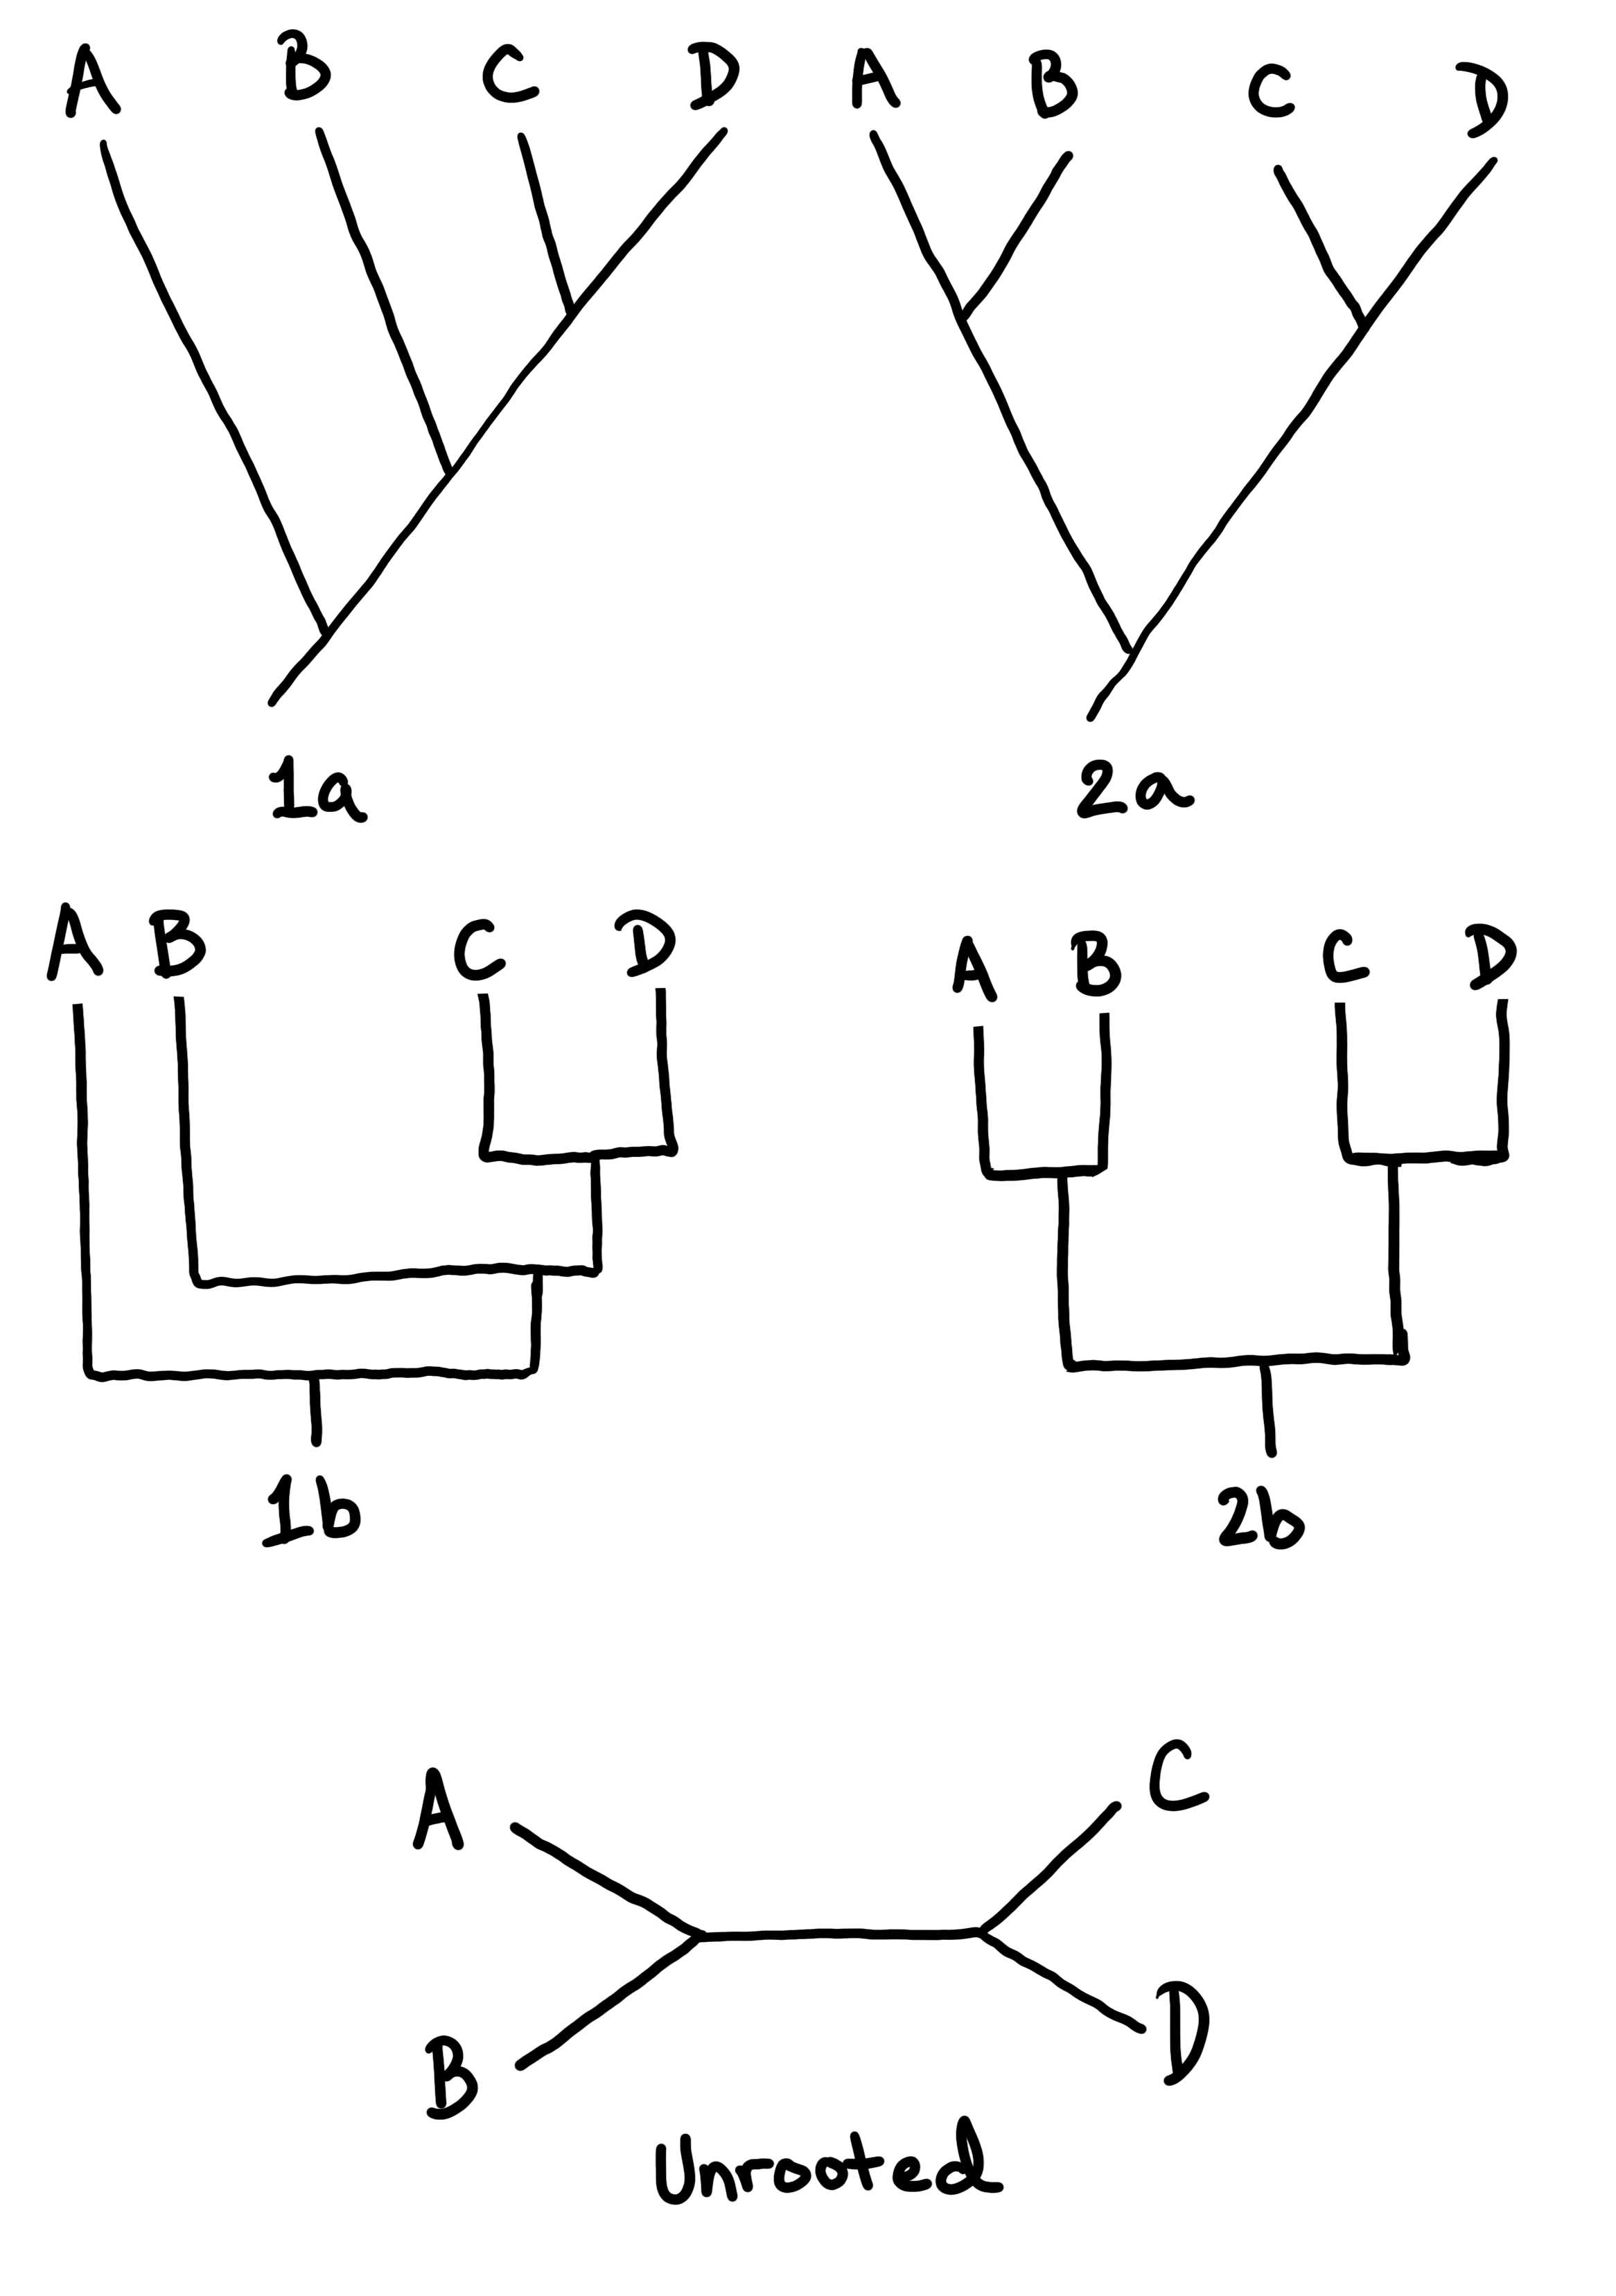 5 example branching diagrams communicating the relationships between 4 different organisms or groups (A, B, C, and D). 